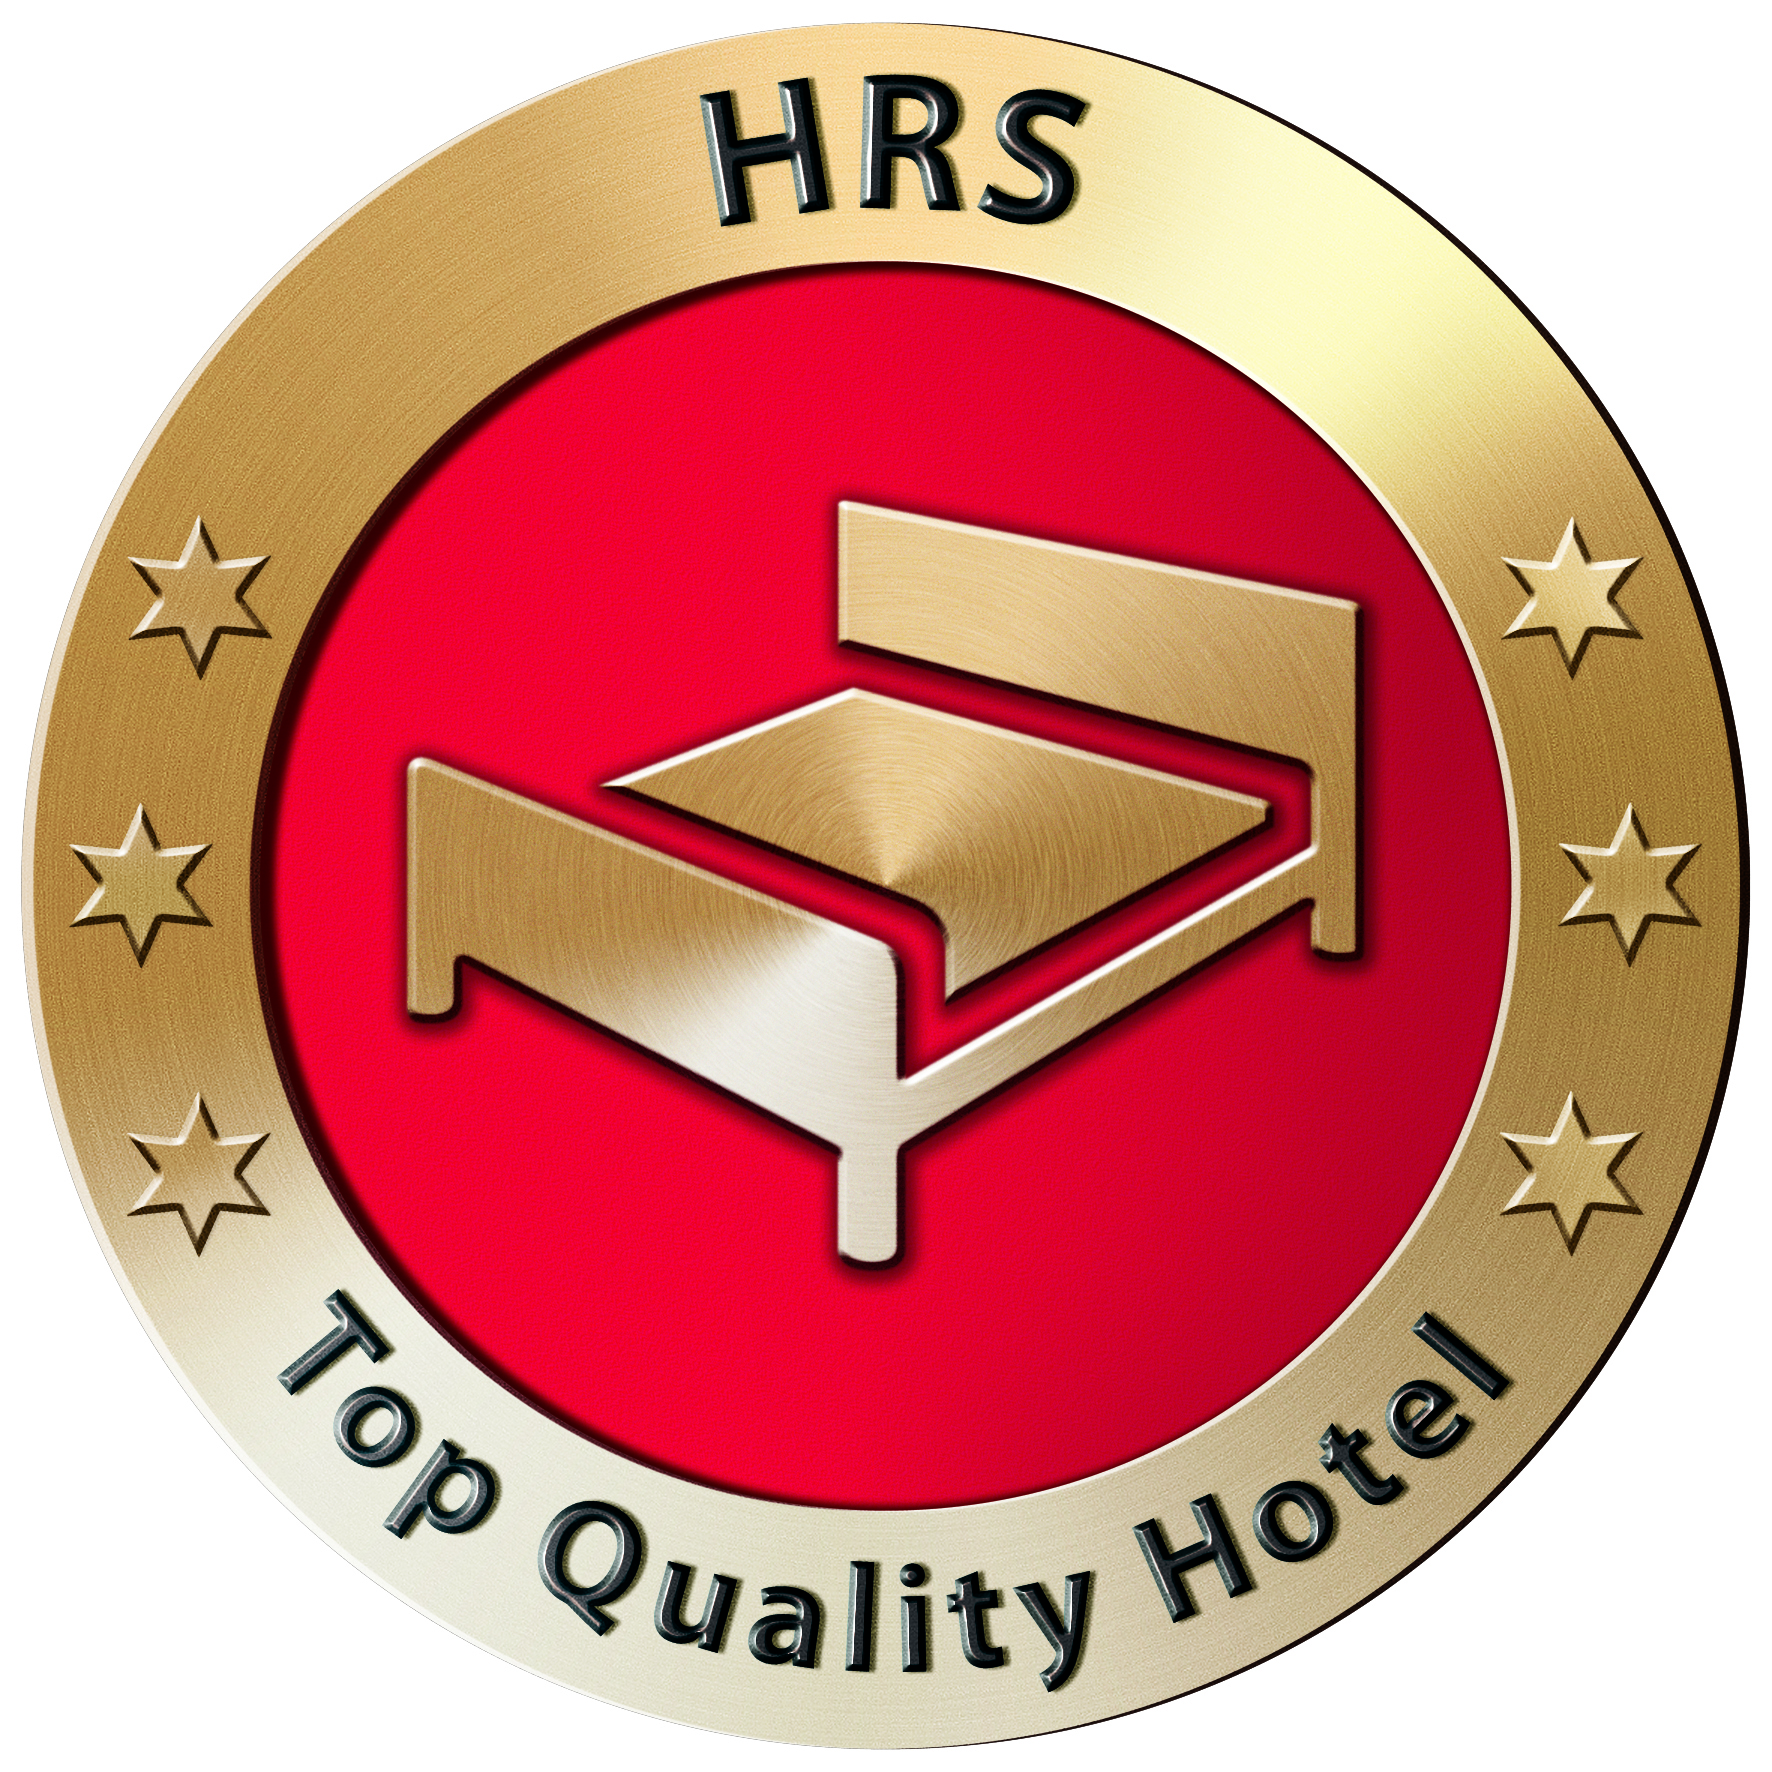 HRS Top Quality Hotel